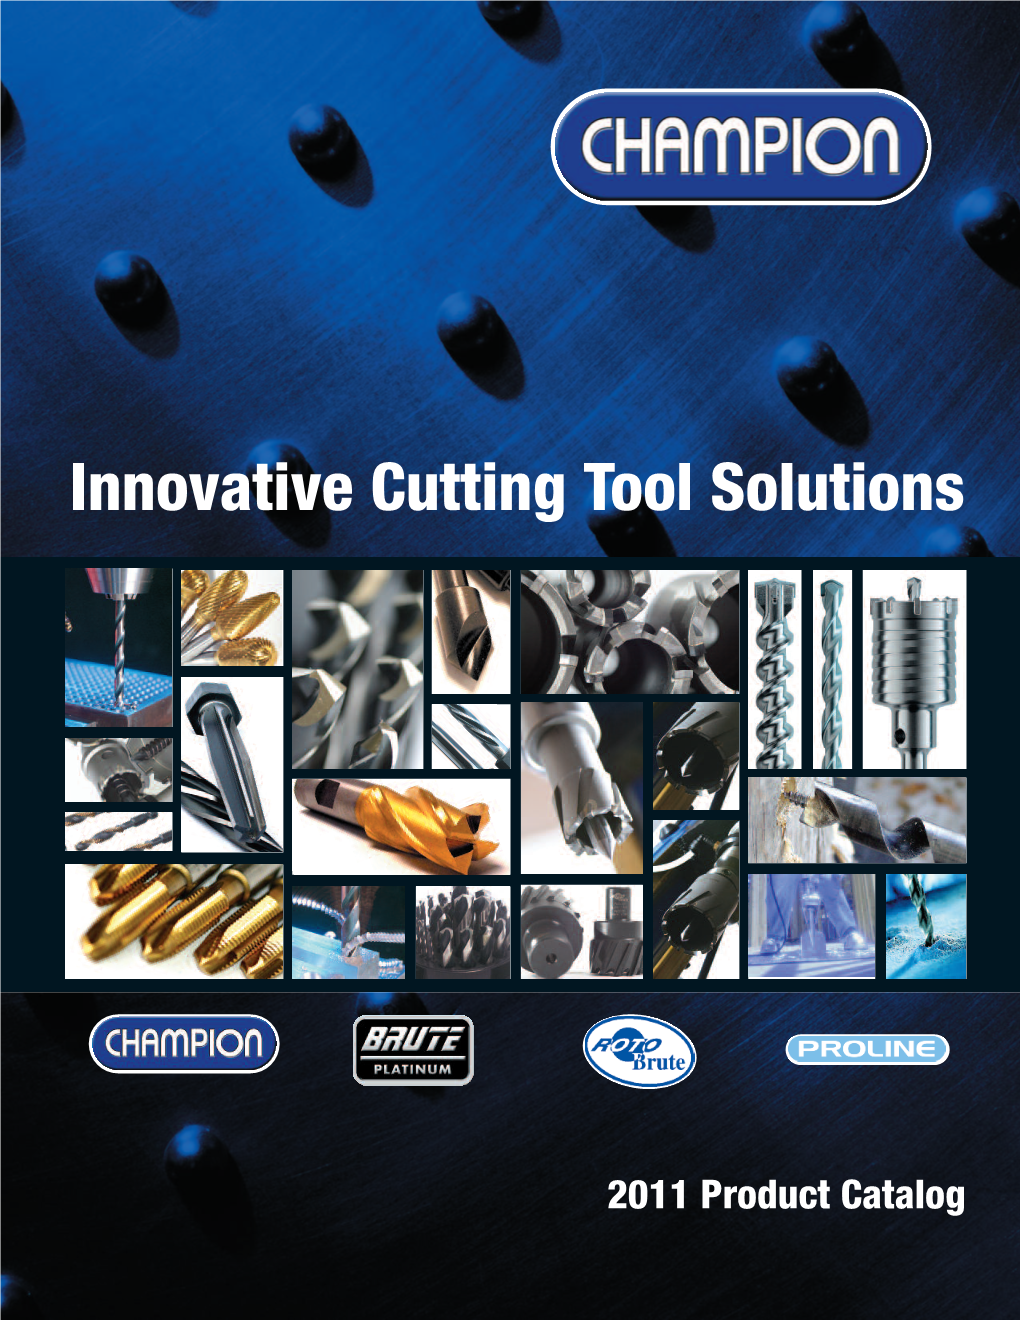 Carbide Tipped Annular Cutters Are Engineered for Cutting 3” and 4” Thick Steel, Pipe, and Square Channel